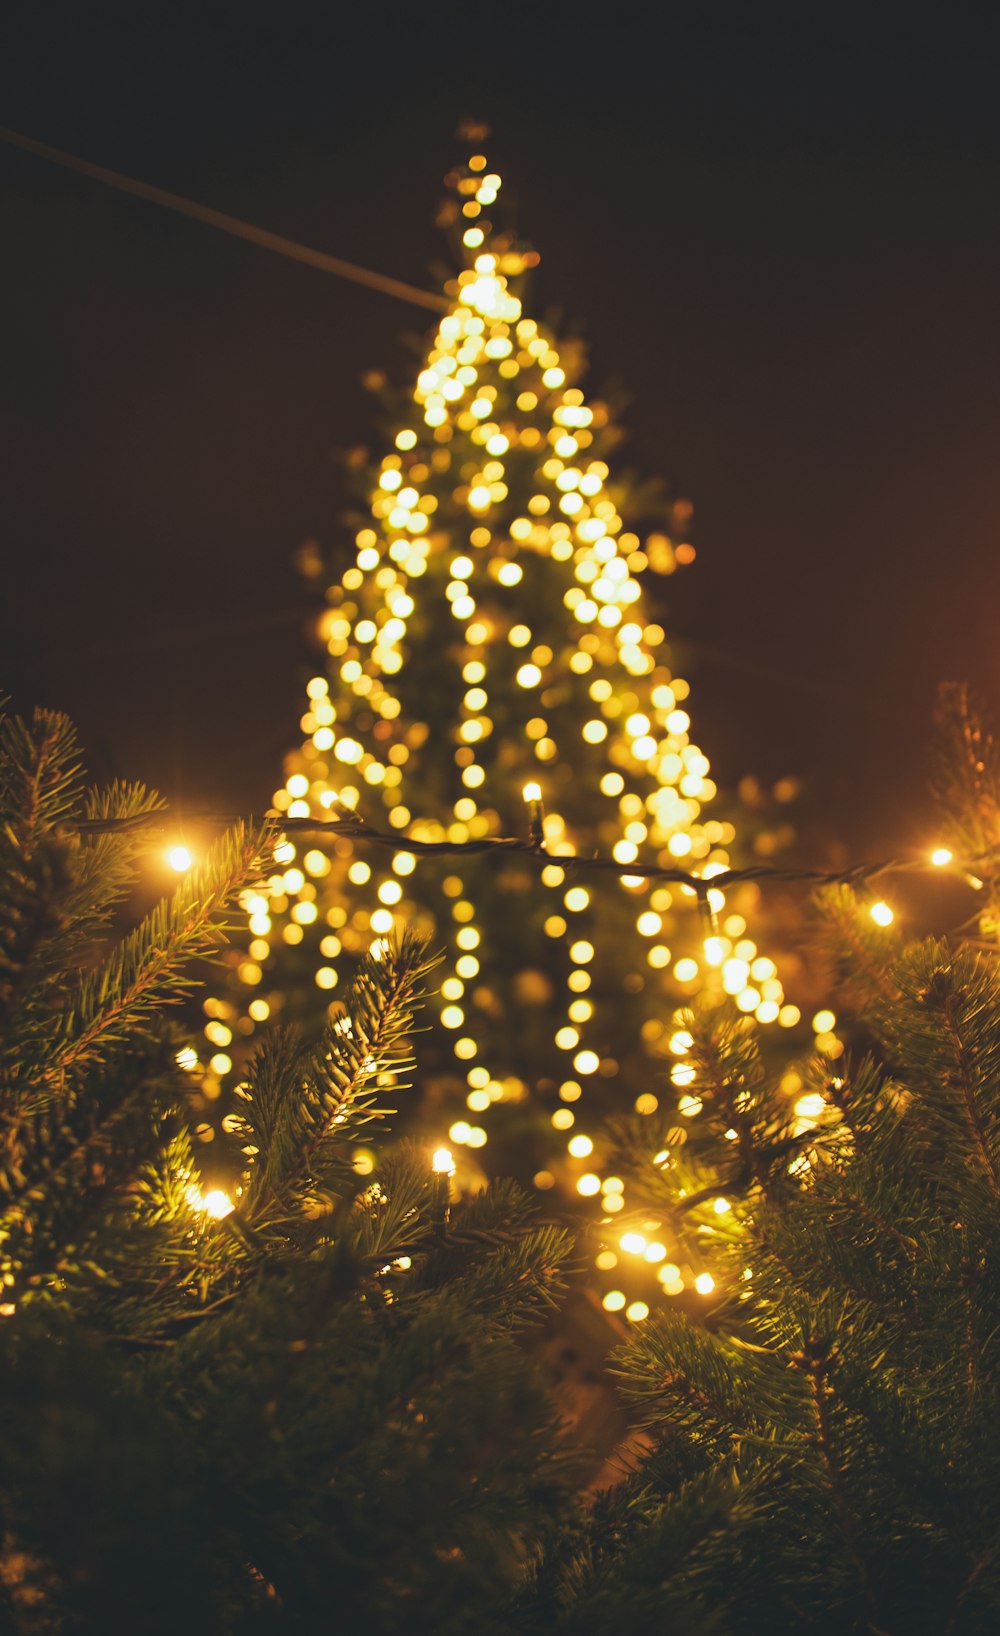 Christmas Tree Lights Pictures | Download Free Images on Unsplash